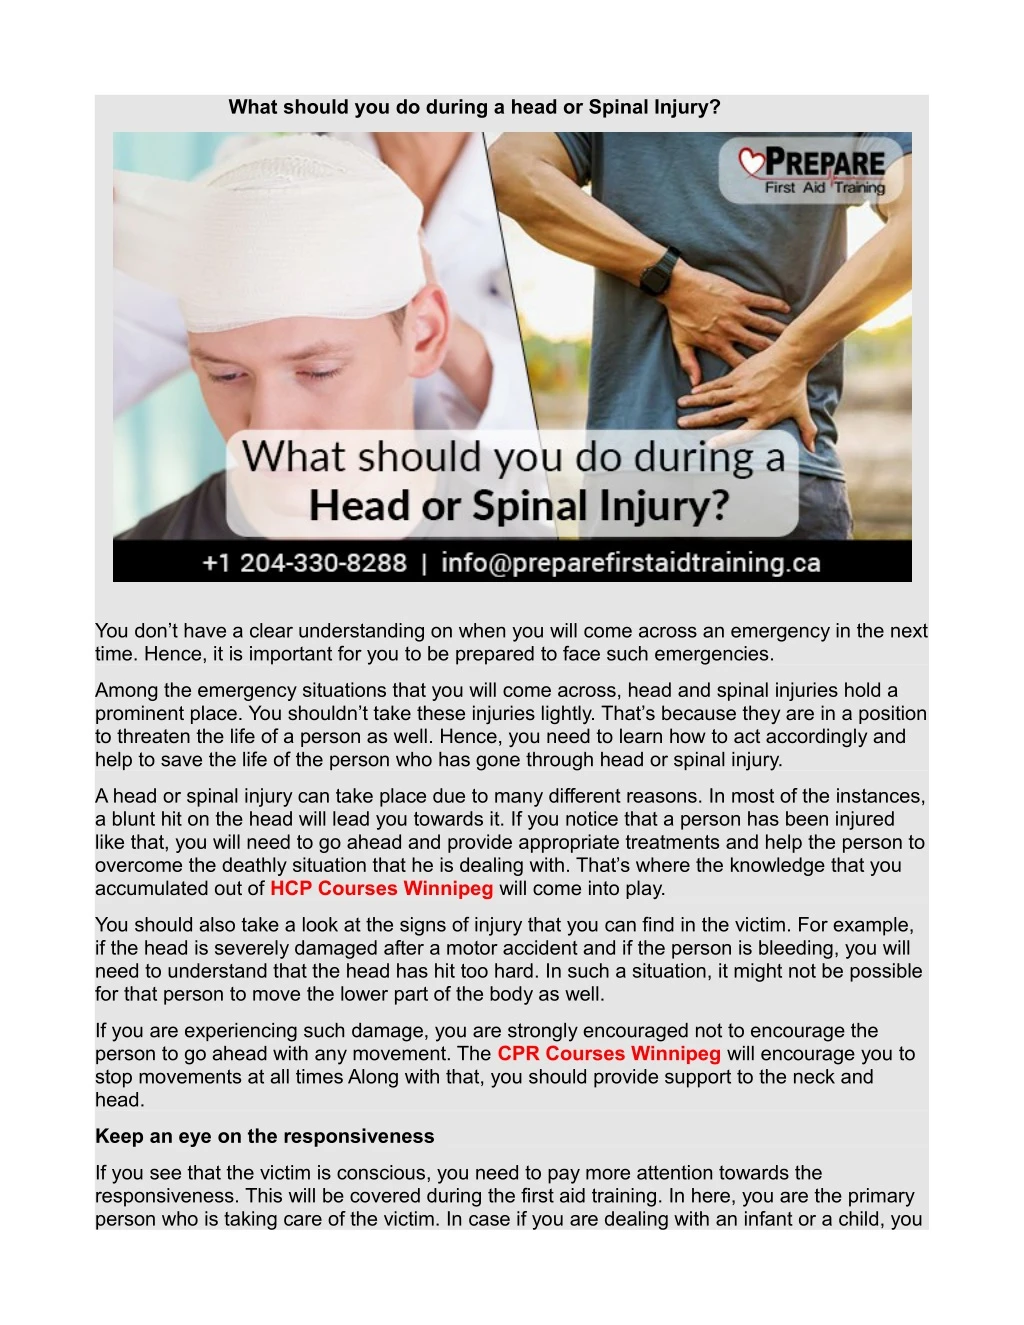 what should you do during a head or spinal injury